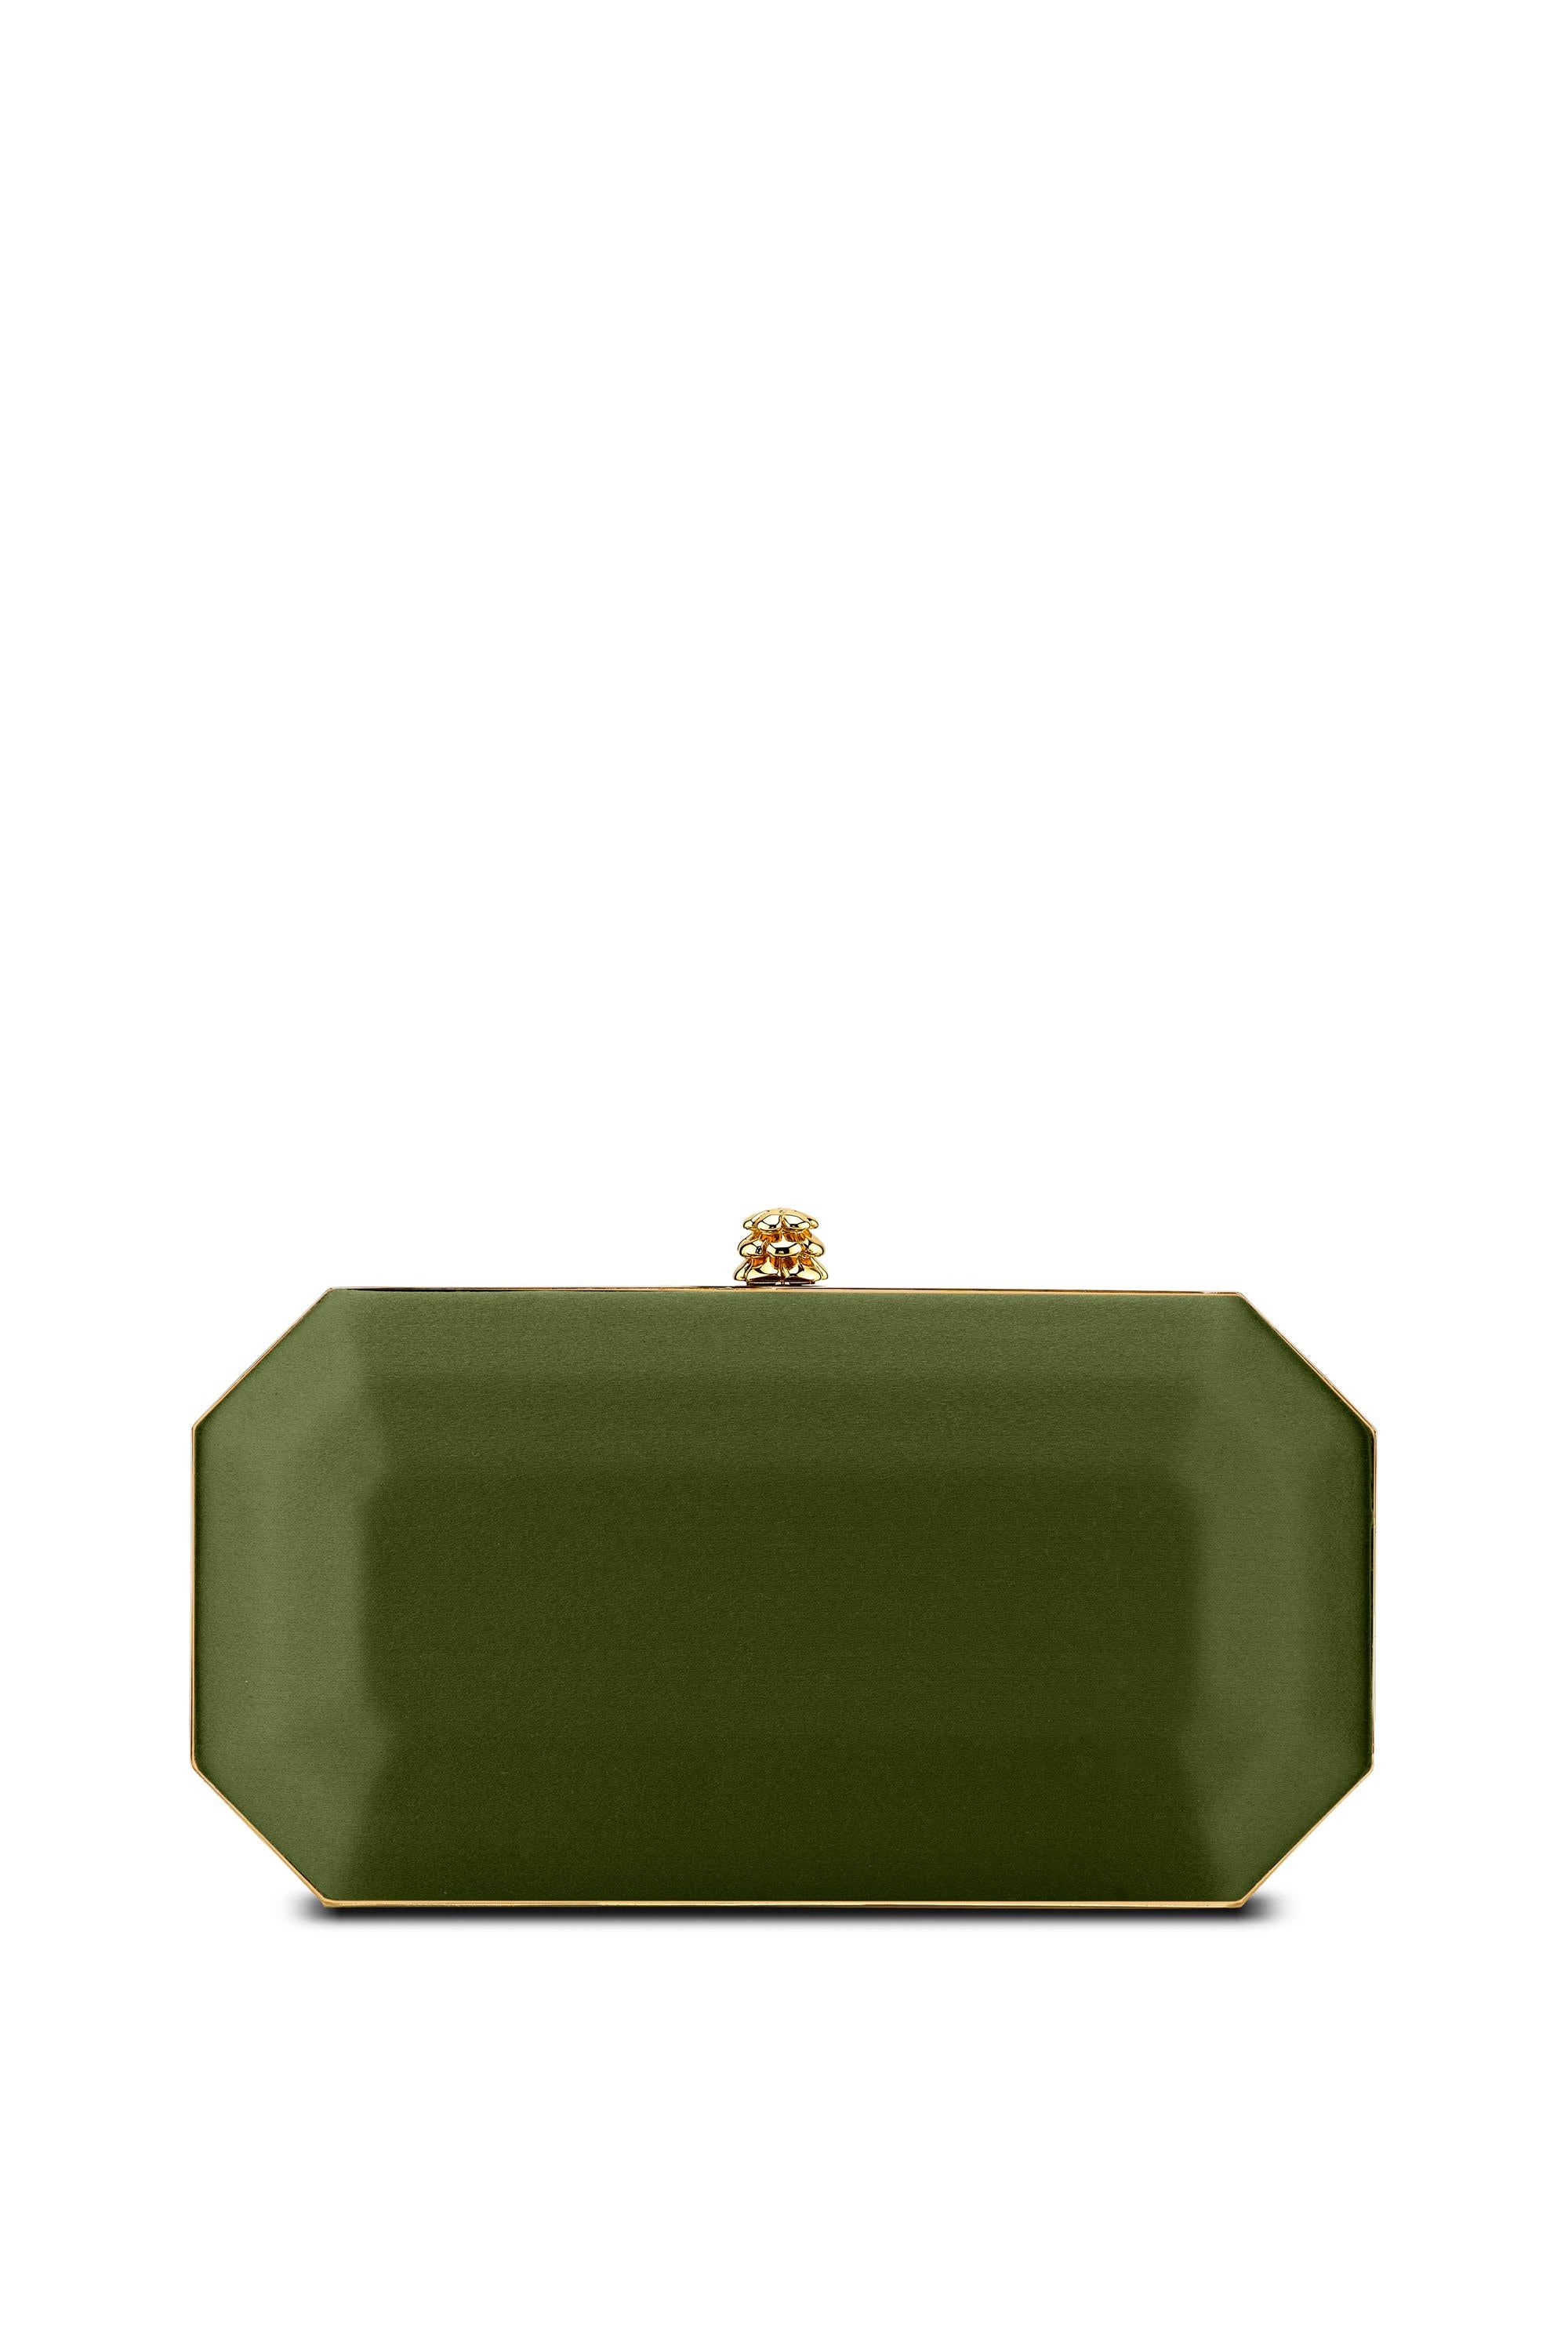 The Perry Small is featured in our Peridot satin with gold hardware. The Perry is a hard-framed clutch designed with interior pockets and an optional gold cross-body chain. It's elegant emerald shape is inspired by Tyler's own engagement ring and